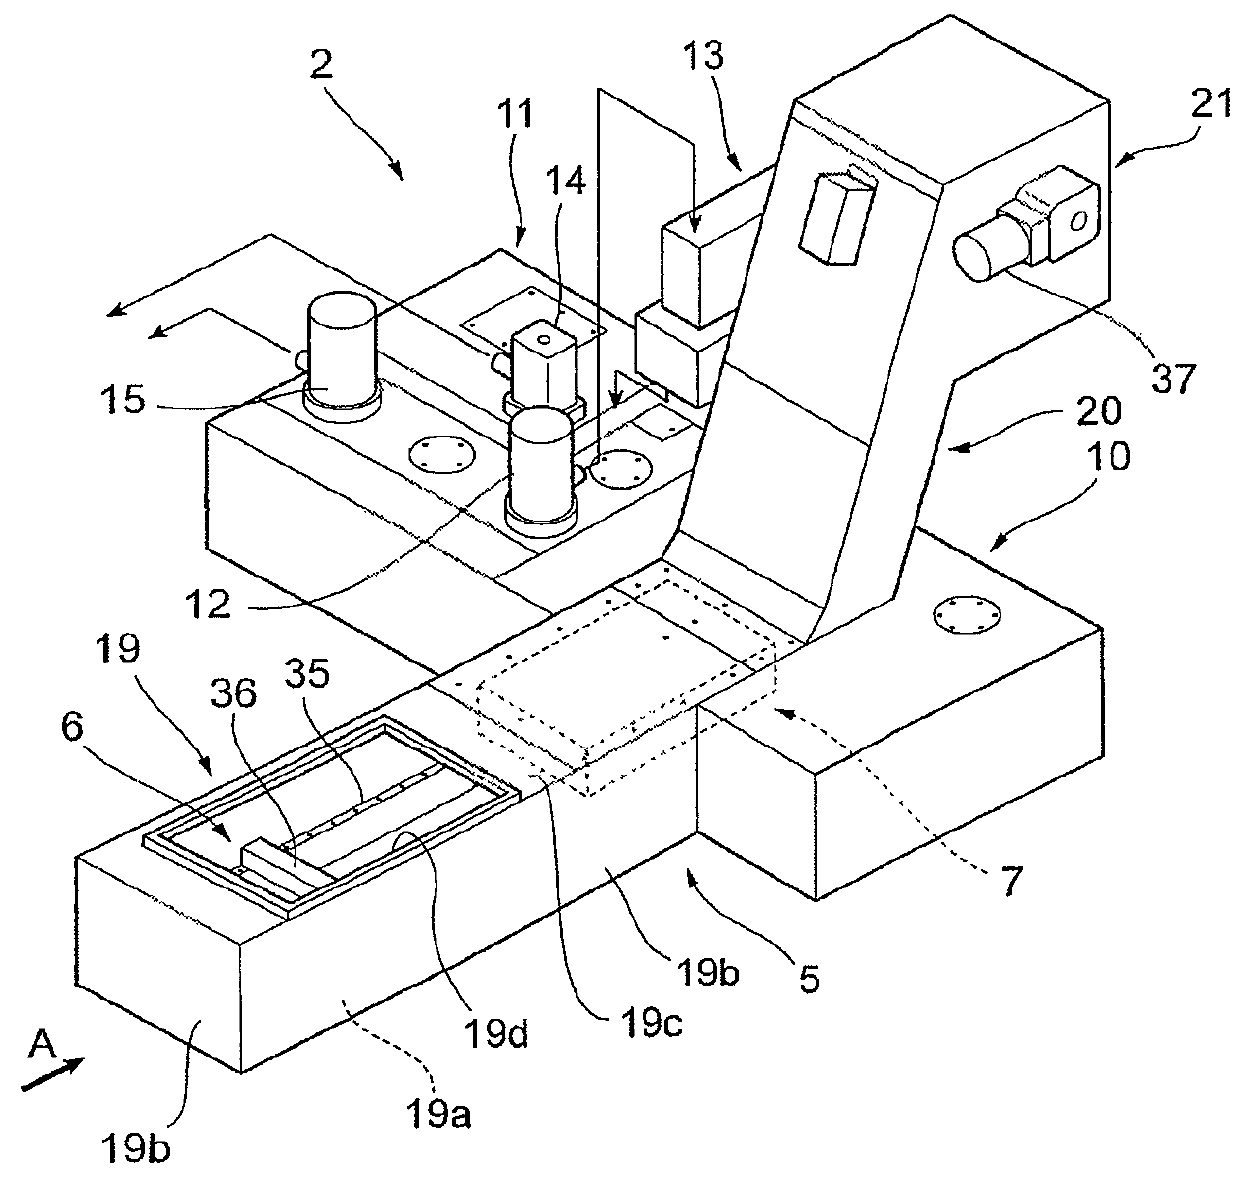 Chip disposal device of machine tool